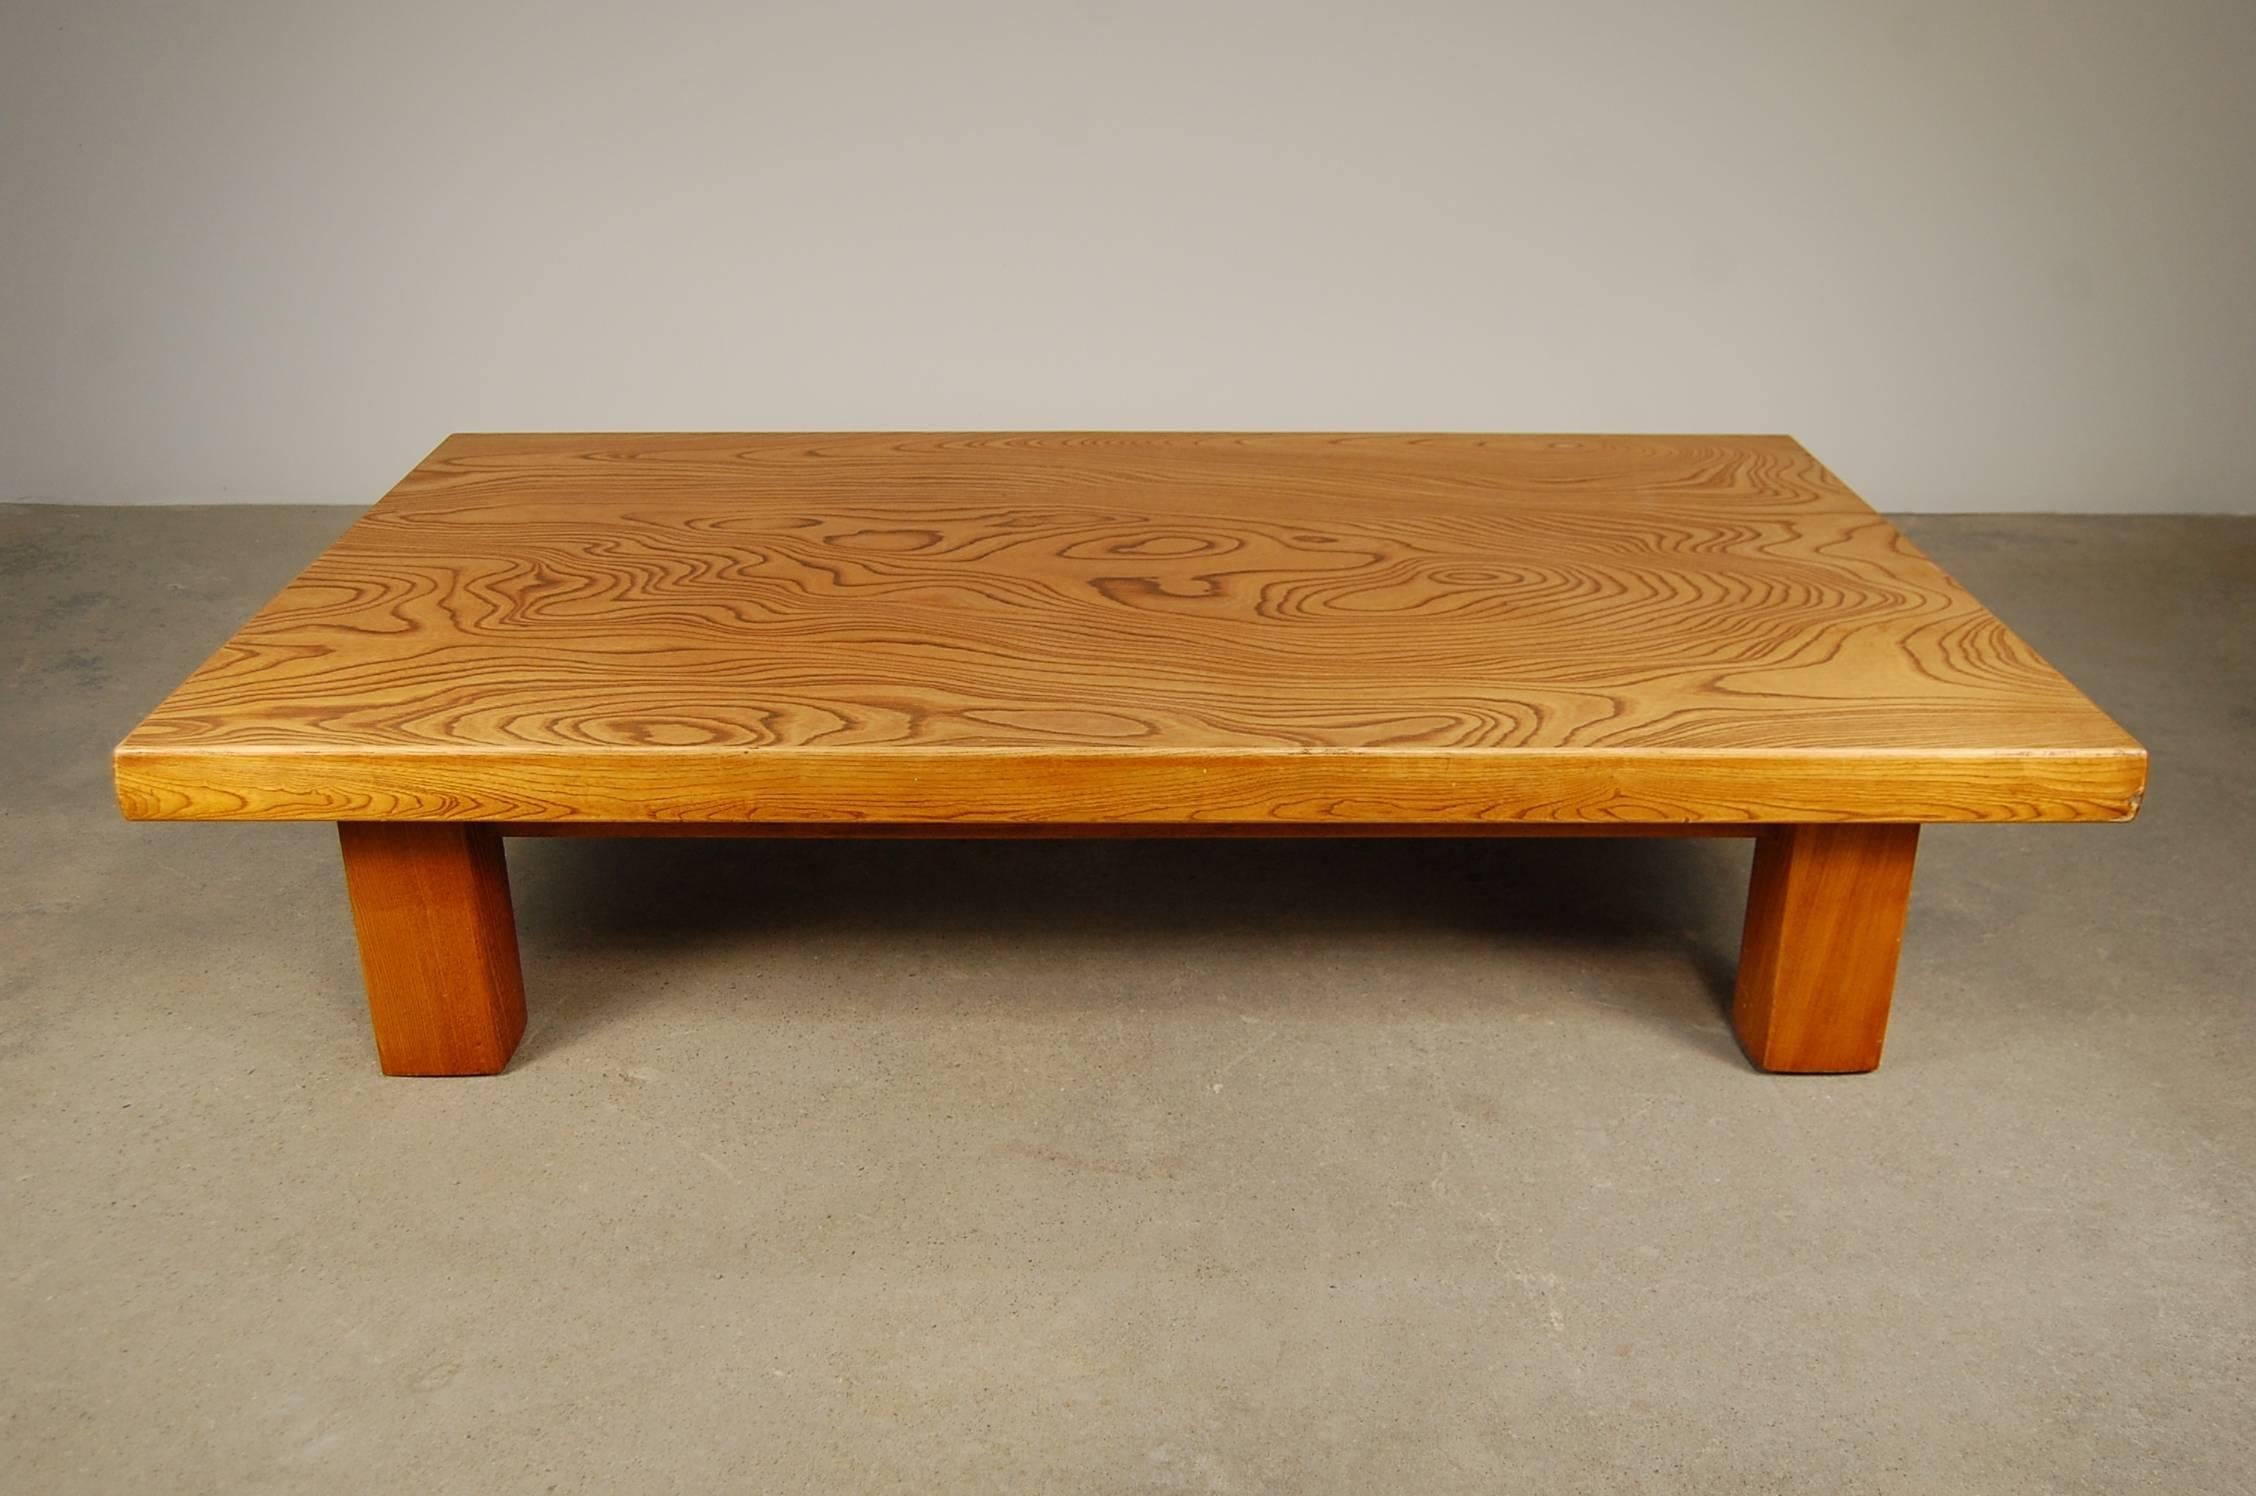 Japanese low table in Japanese elm. The figuring on the top is absolutely amazing, and the finish has a beautiful, slightly honey or amber coloration. The last image is to explain the shape of the legs, as they aren't entirely square. I think the